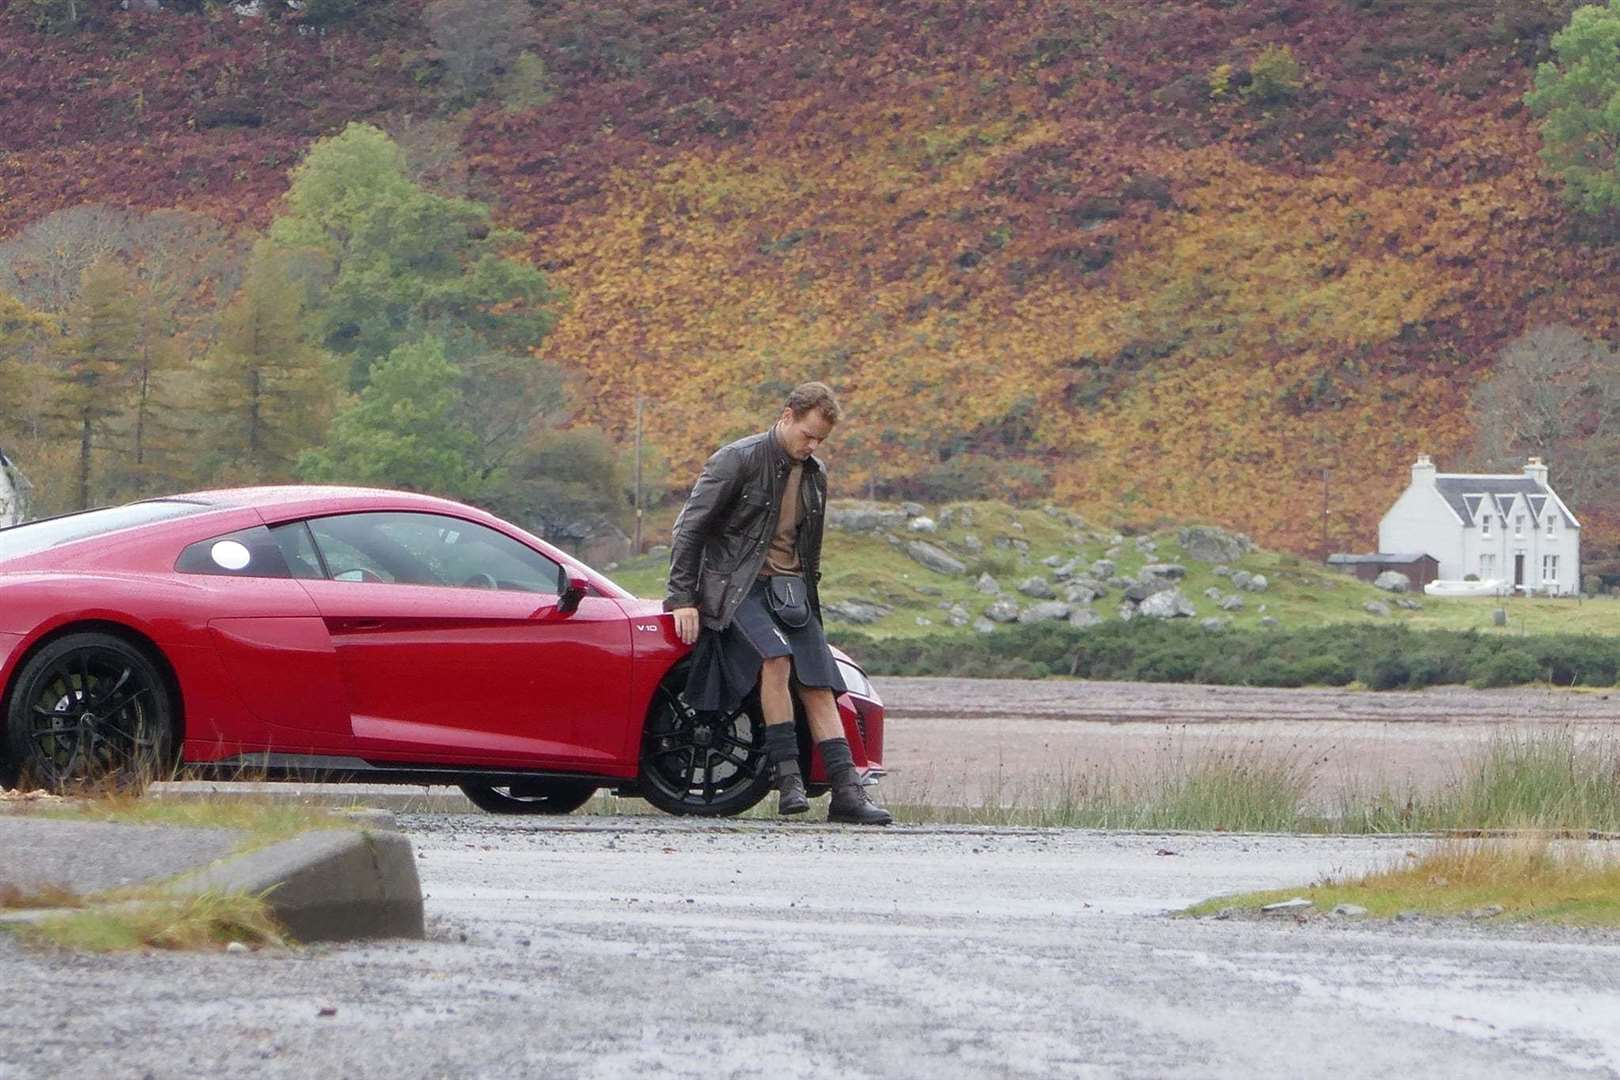 Mr Heughan took time to relax on the bonnet of his car.